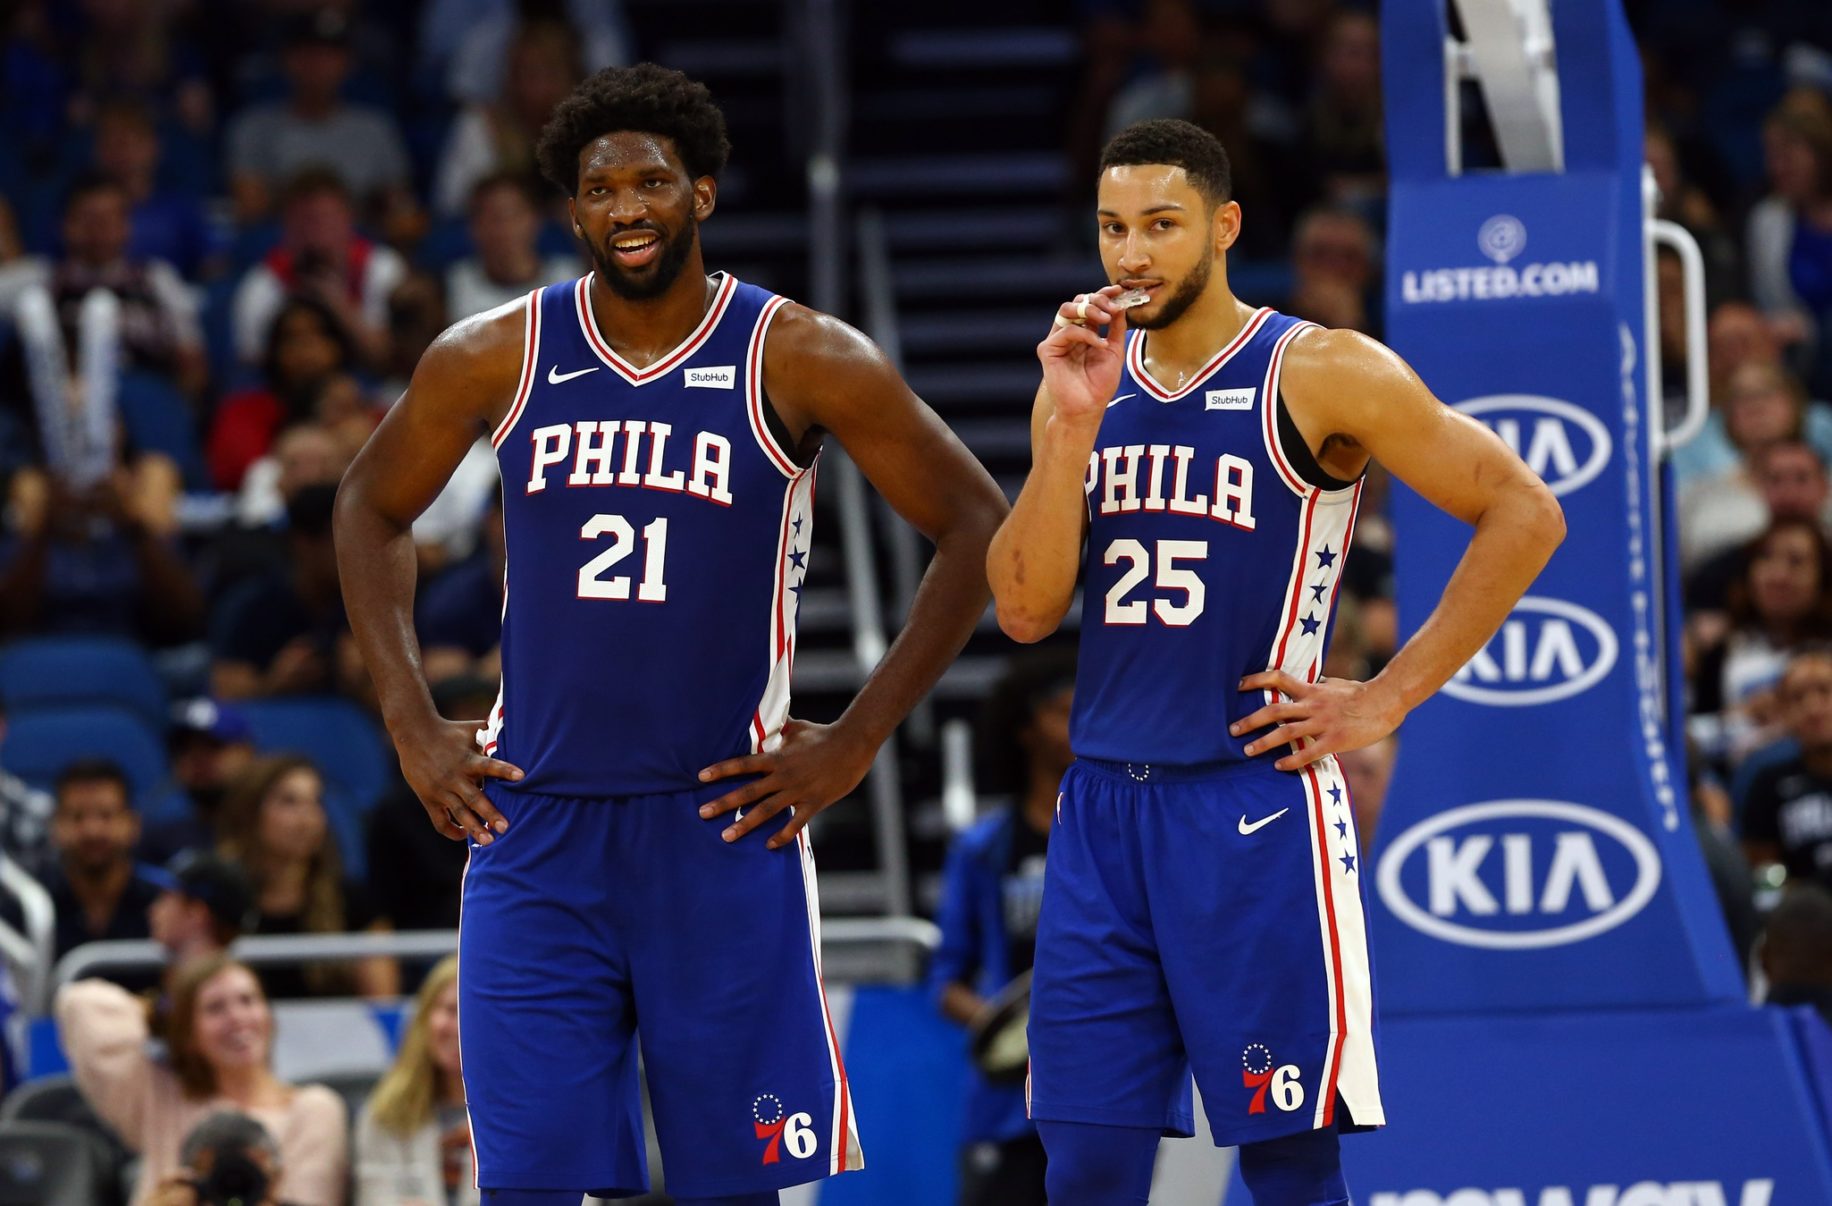 Sixers Fan Believes Team Should Trade Both Ben Simmons and Joel Embiid